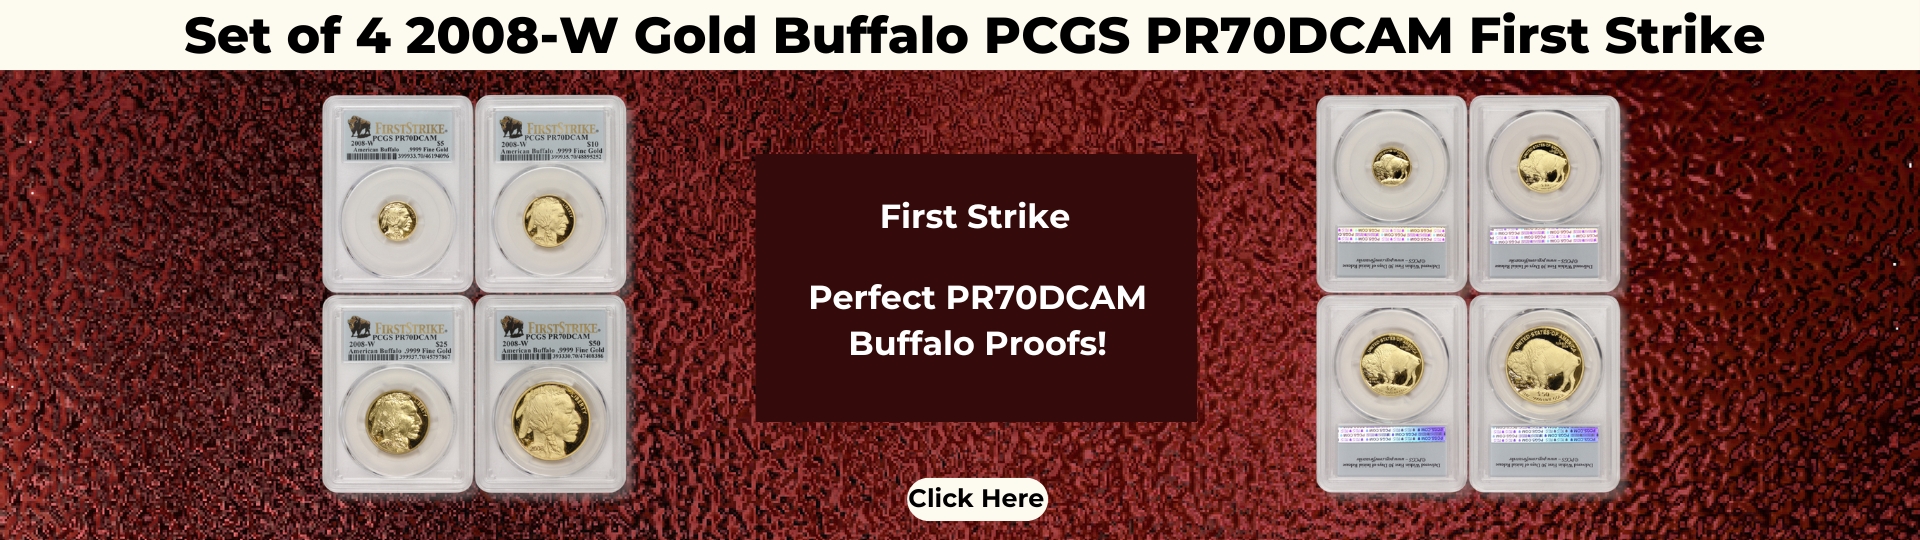 Set of 4 two thousand and eight west point minted gold buffalo proofs graded P R seventy deep cameo by P C G S and certified first strike